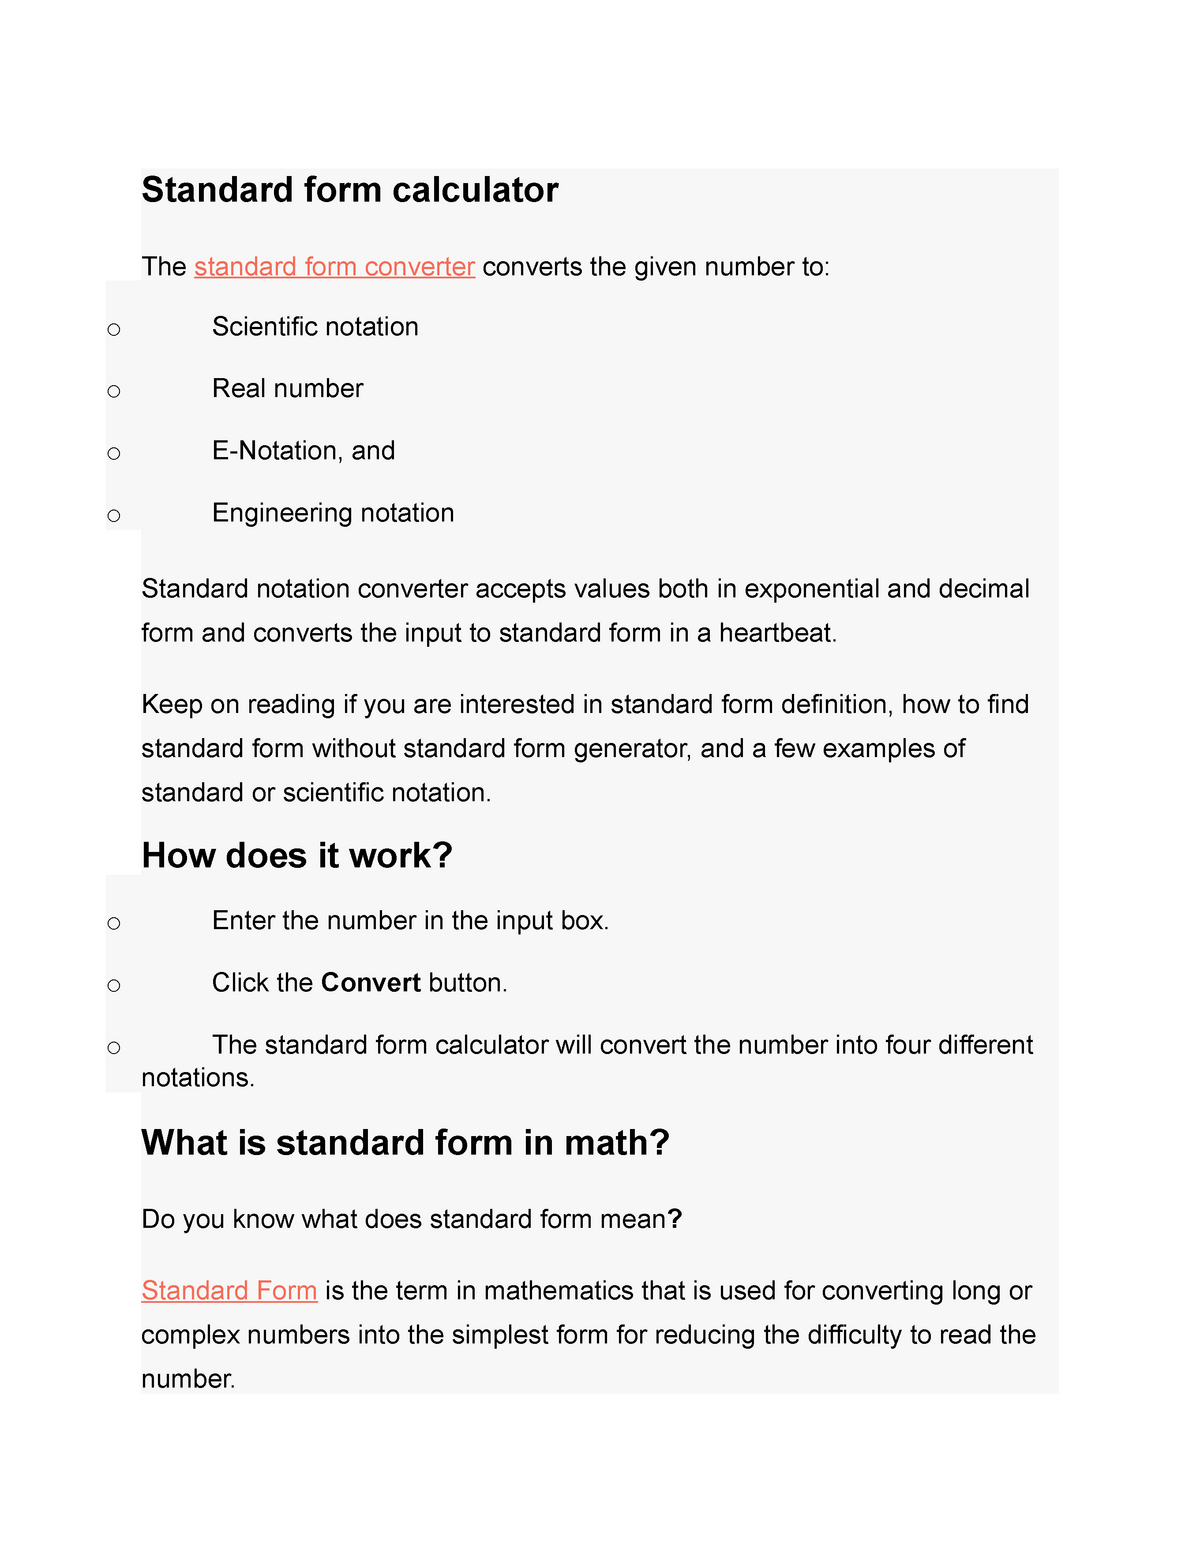 standard-form-calculator-keep-on-reading-if-you-are-interested-in